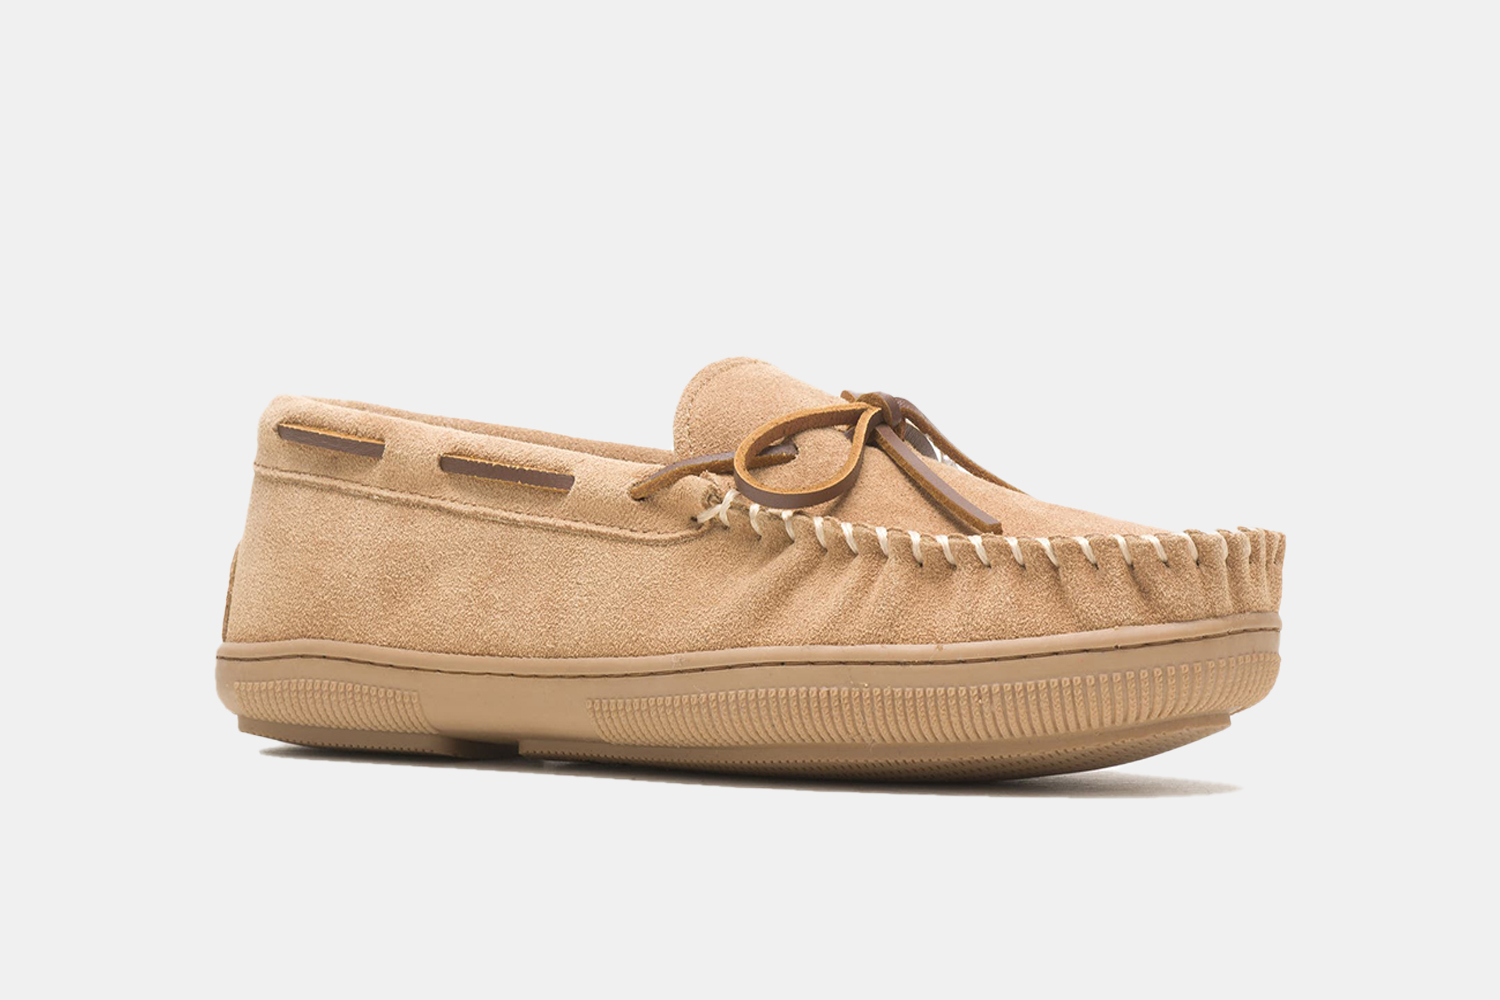 a classic suede looking moccasin